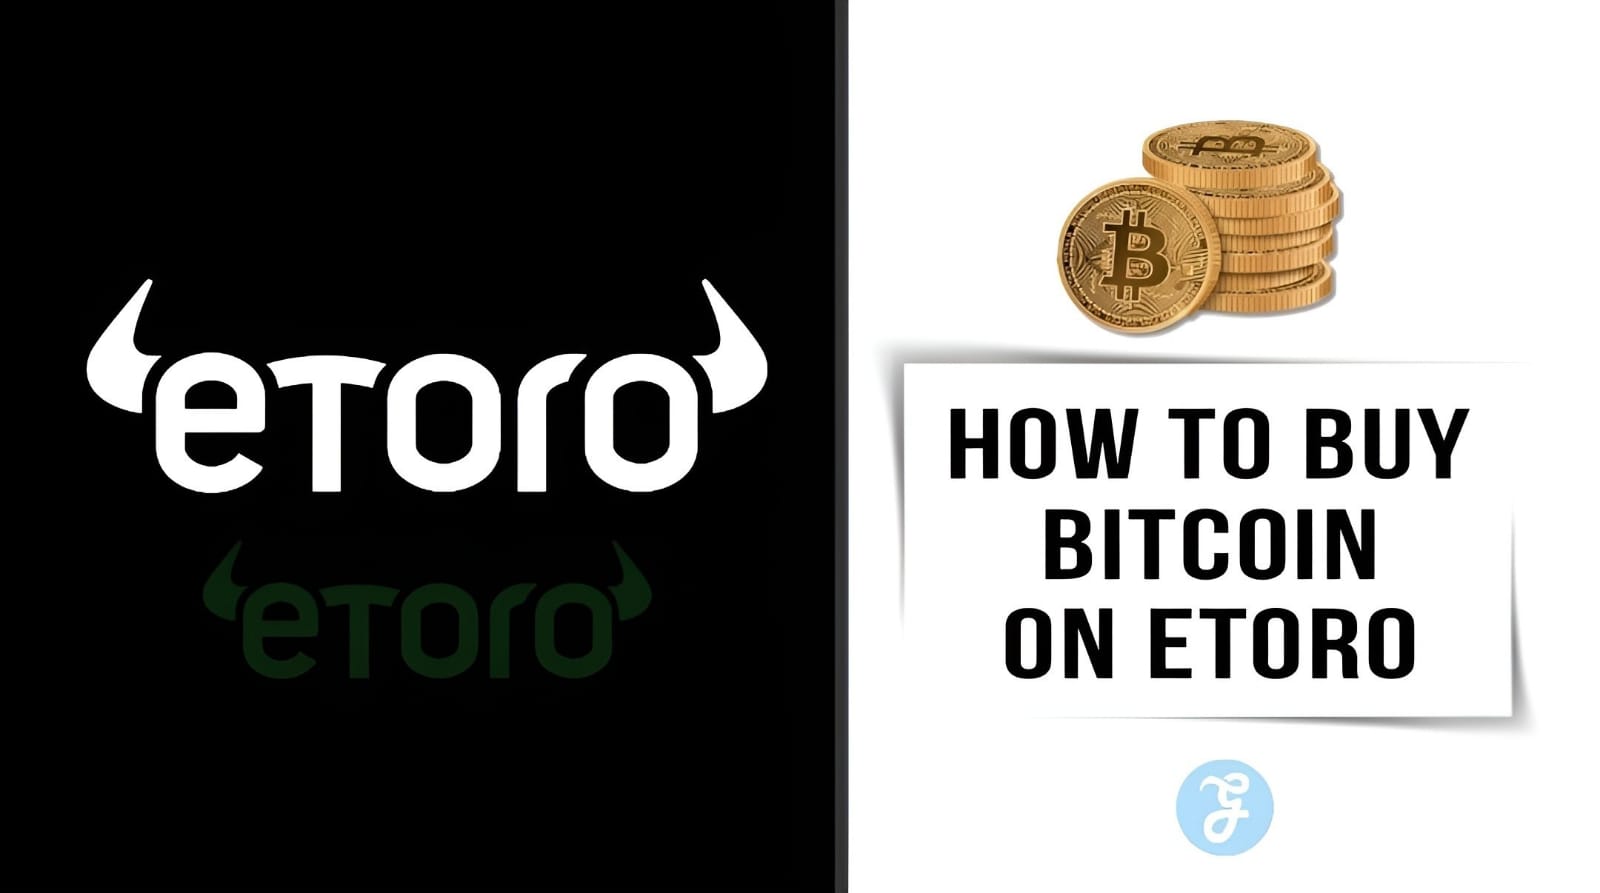 How To Buy Bitcoin On Etoro: Step-by-Step Guide on How to Buy Bitcoin on eToro